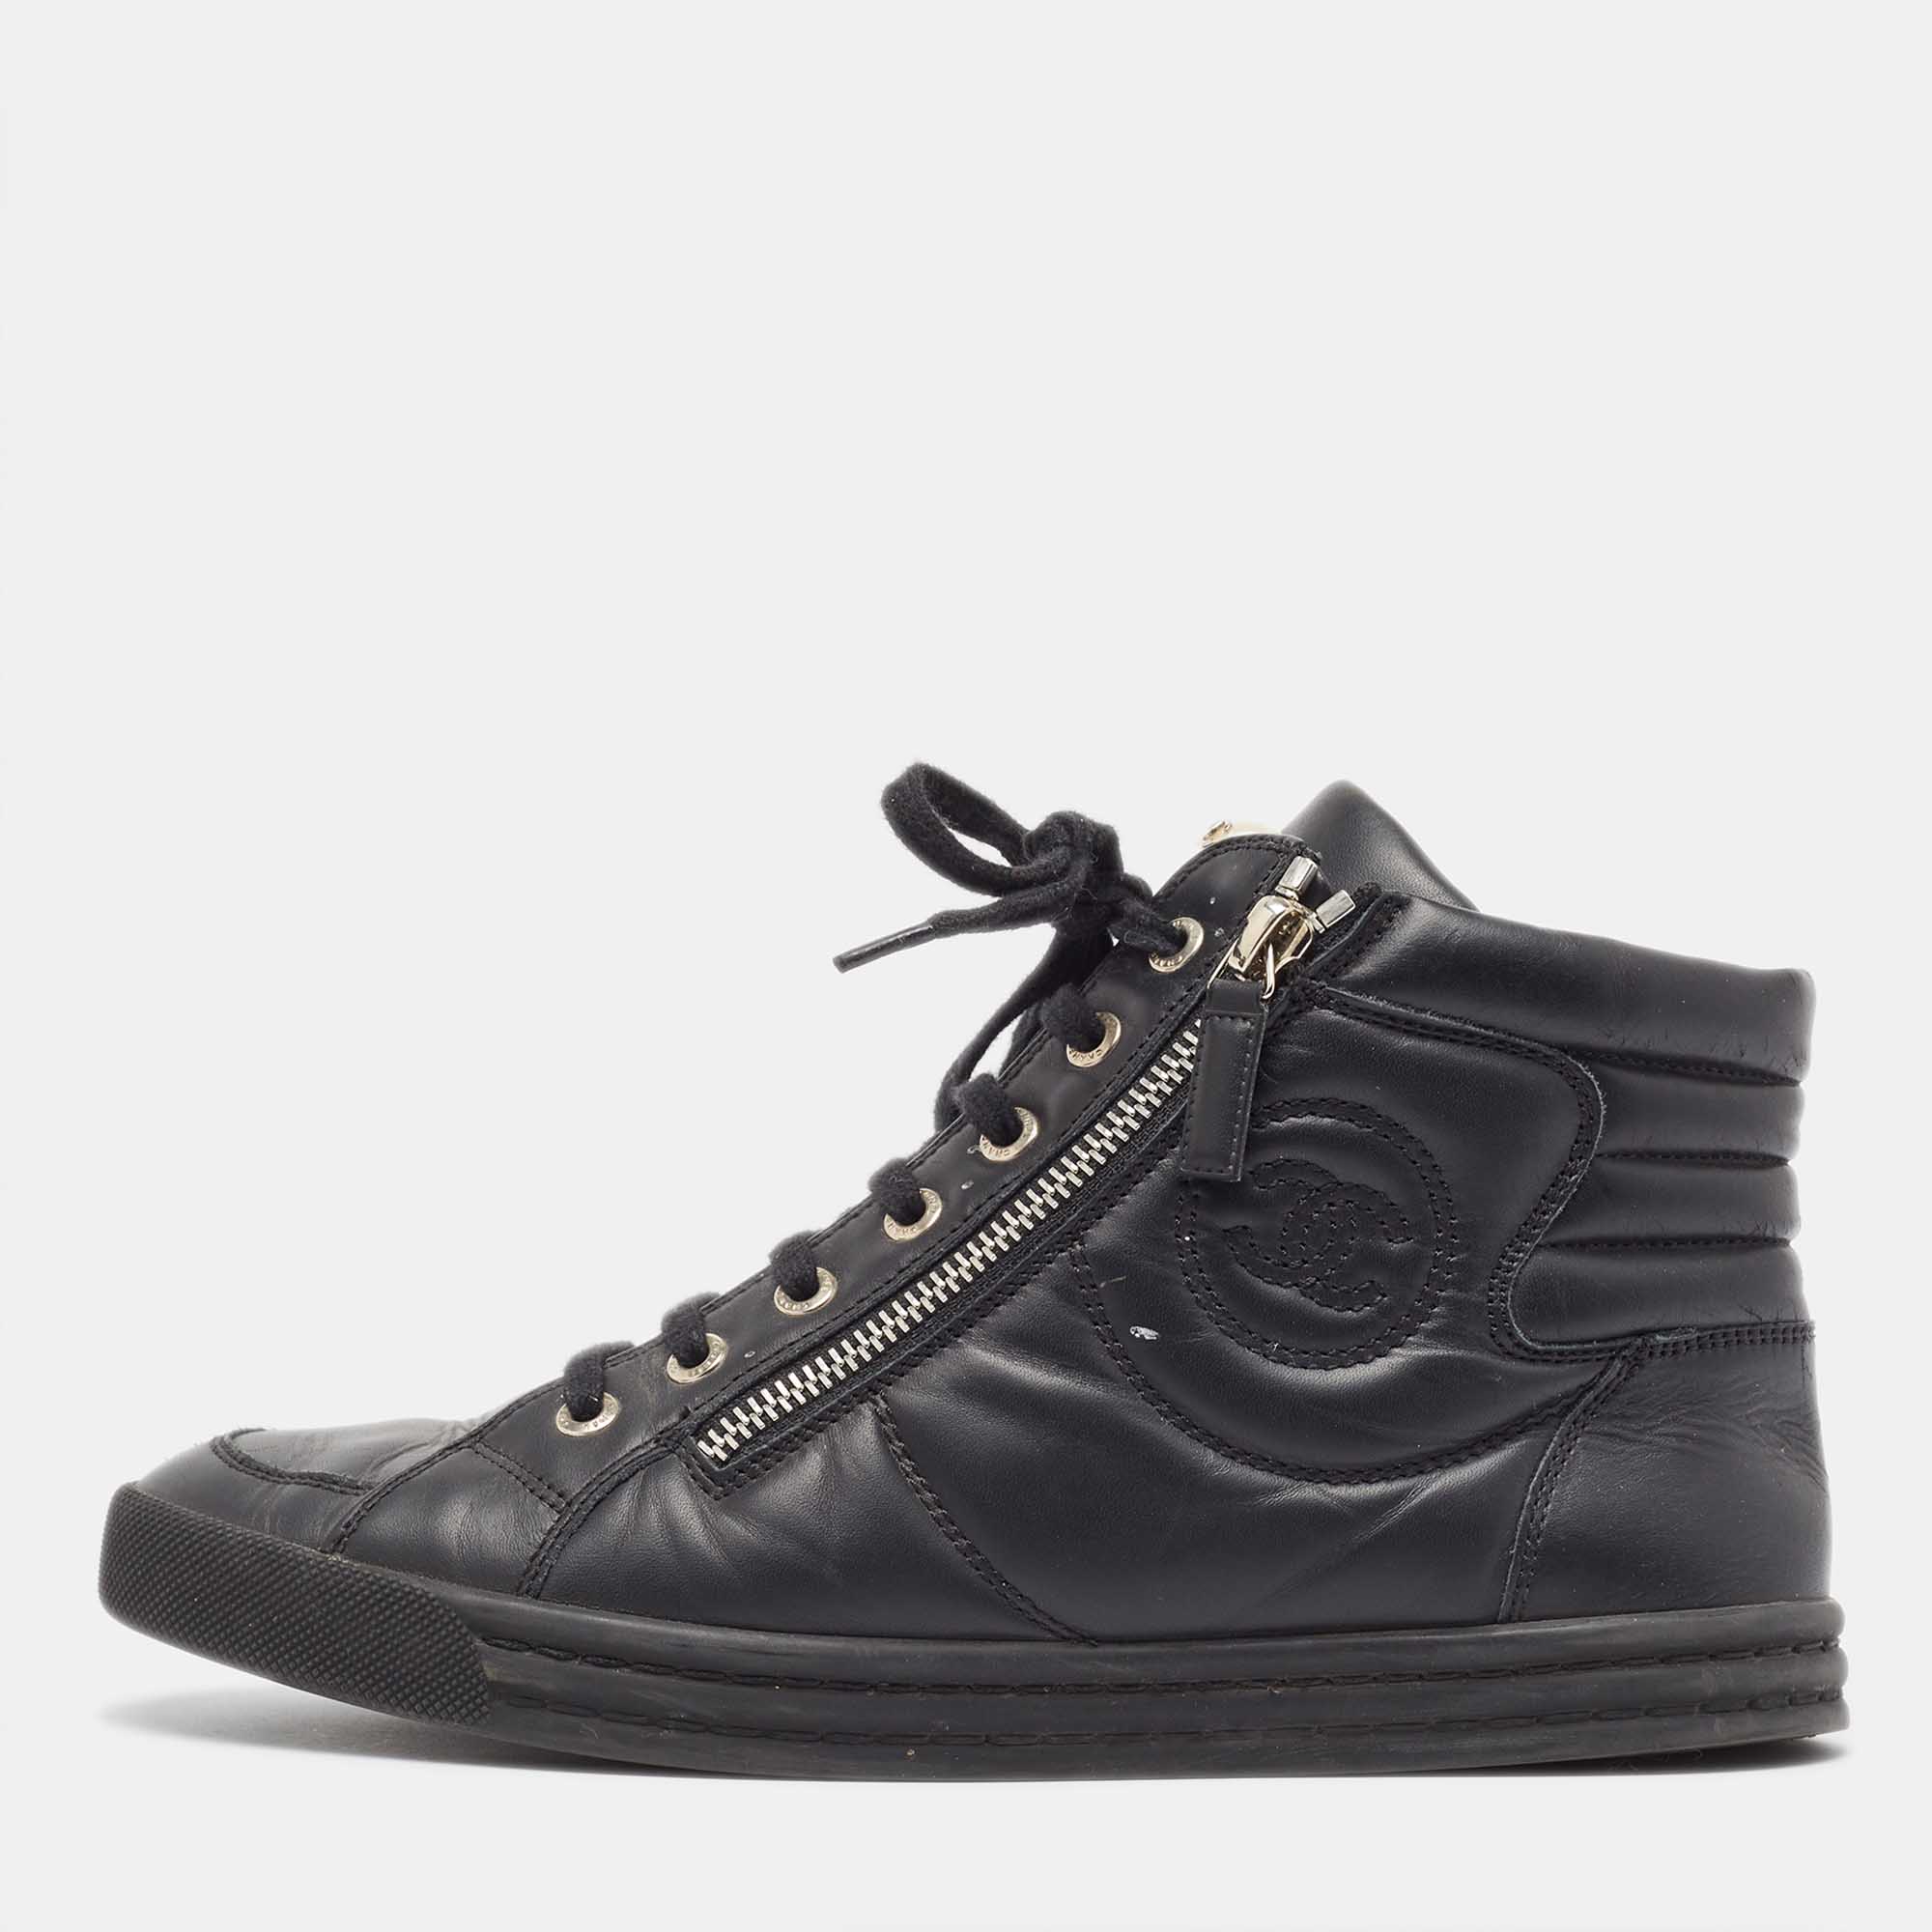 Pre-owned Chanel Black Leather Cc High Top Sneakers Size 38.5